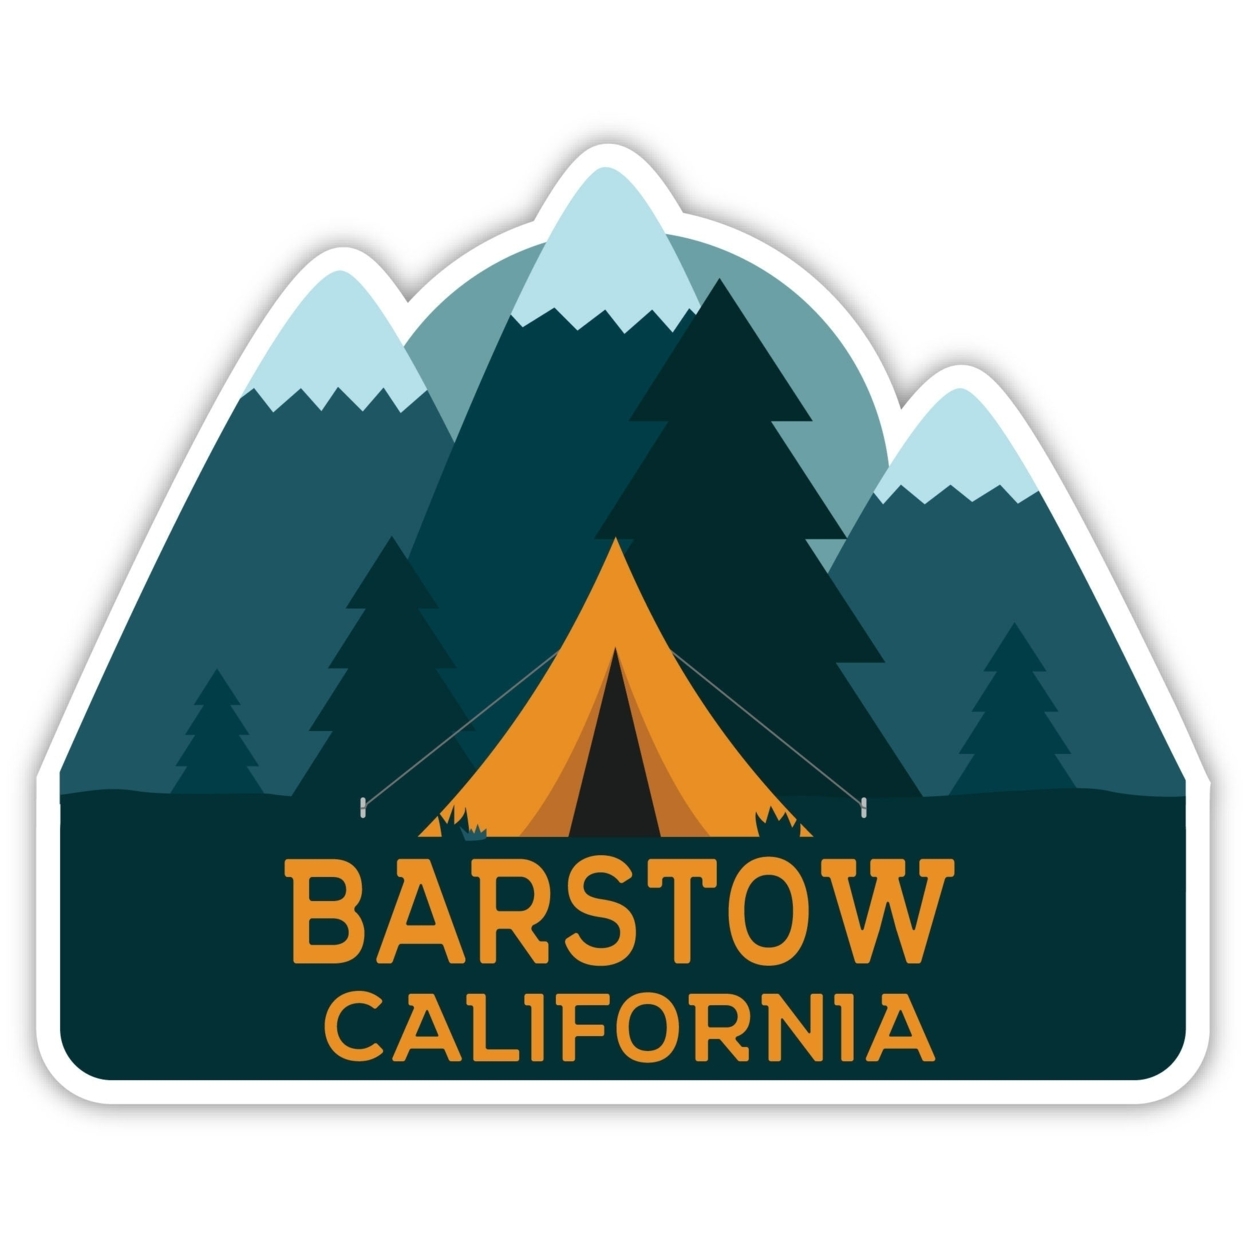 Barstow California Souvenir Decorative Stickers (Choose Theme And Size) - 4-Pack, 2-Inch, Camp Life